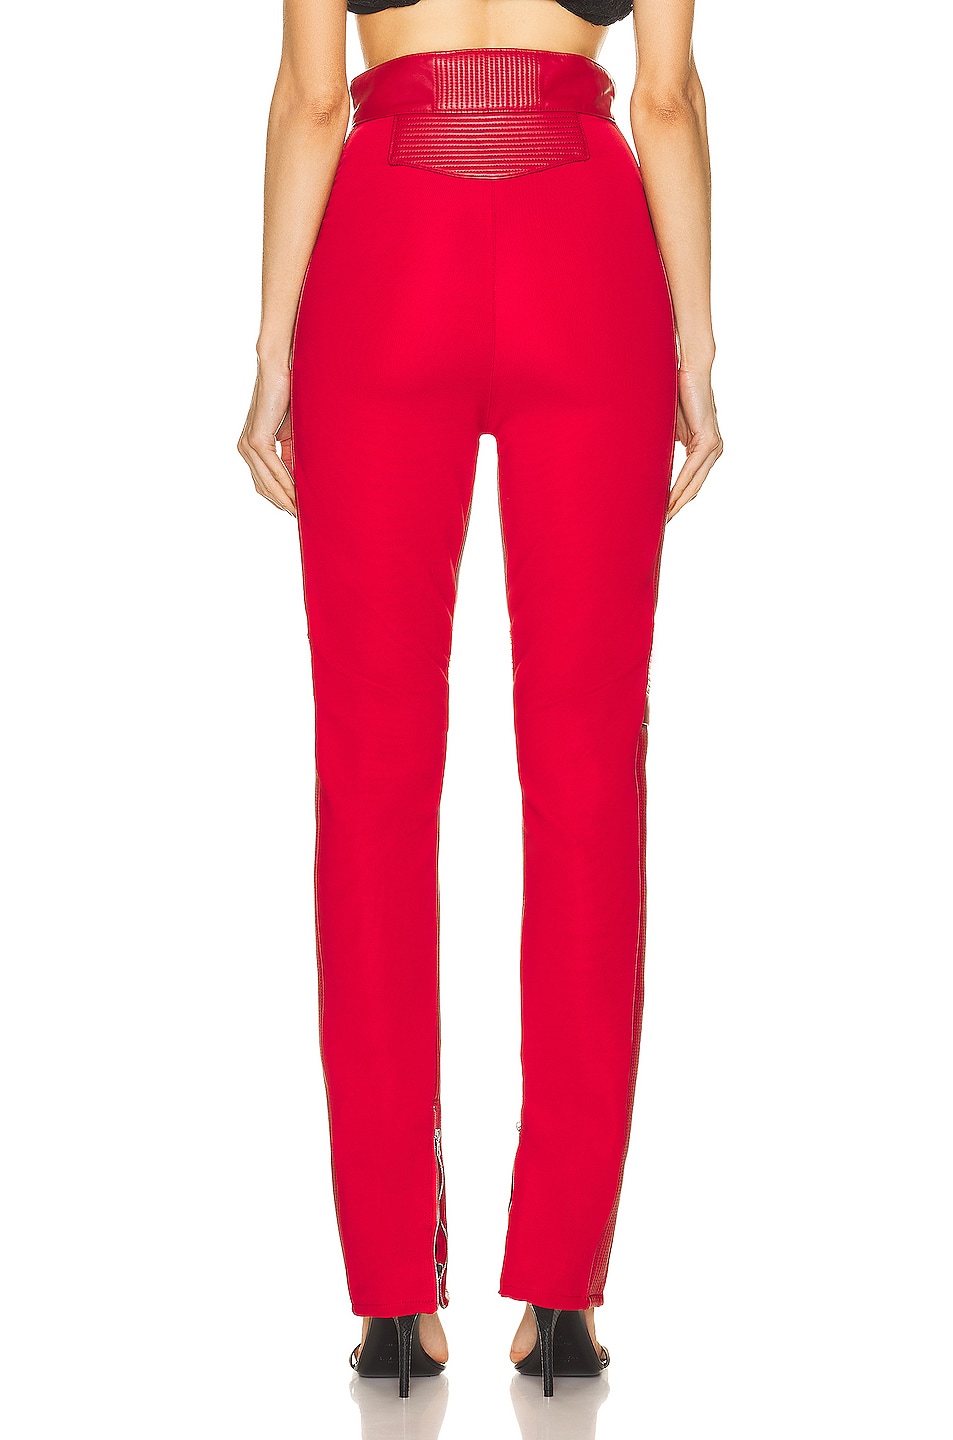 David Koma Leather Trouser in Red | FWRD